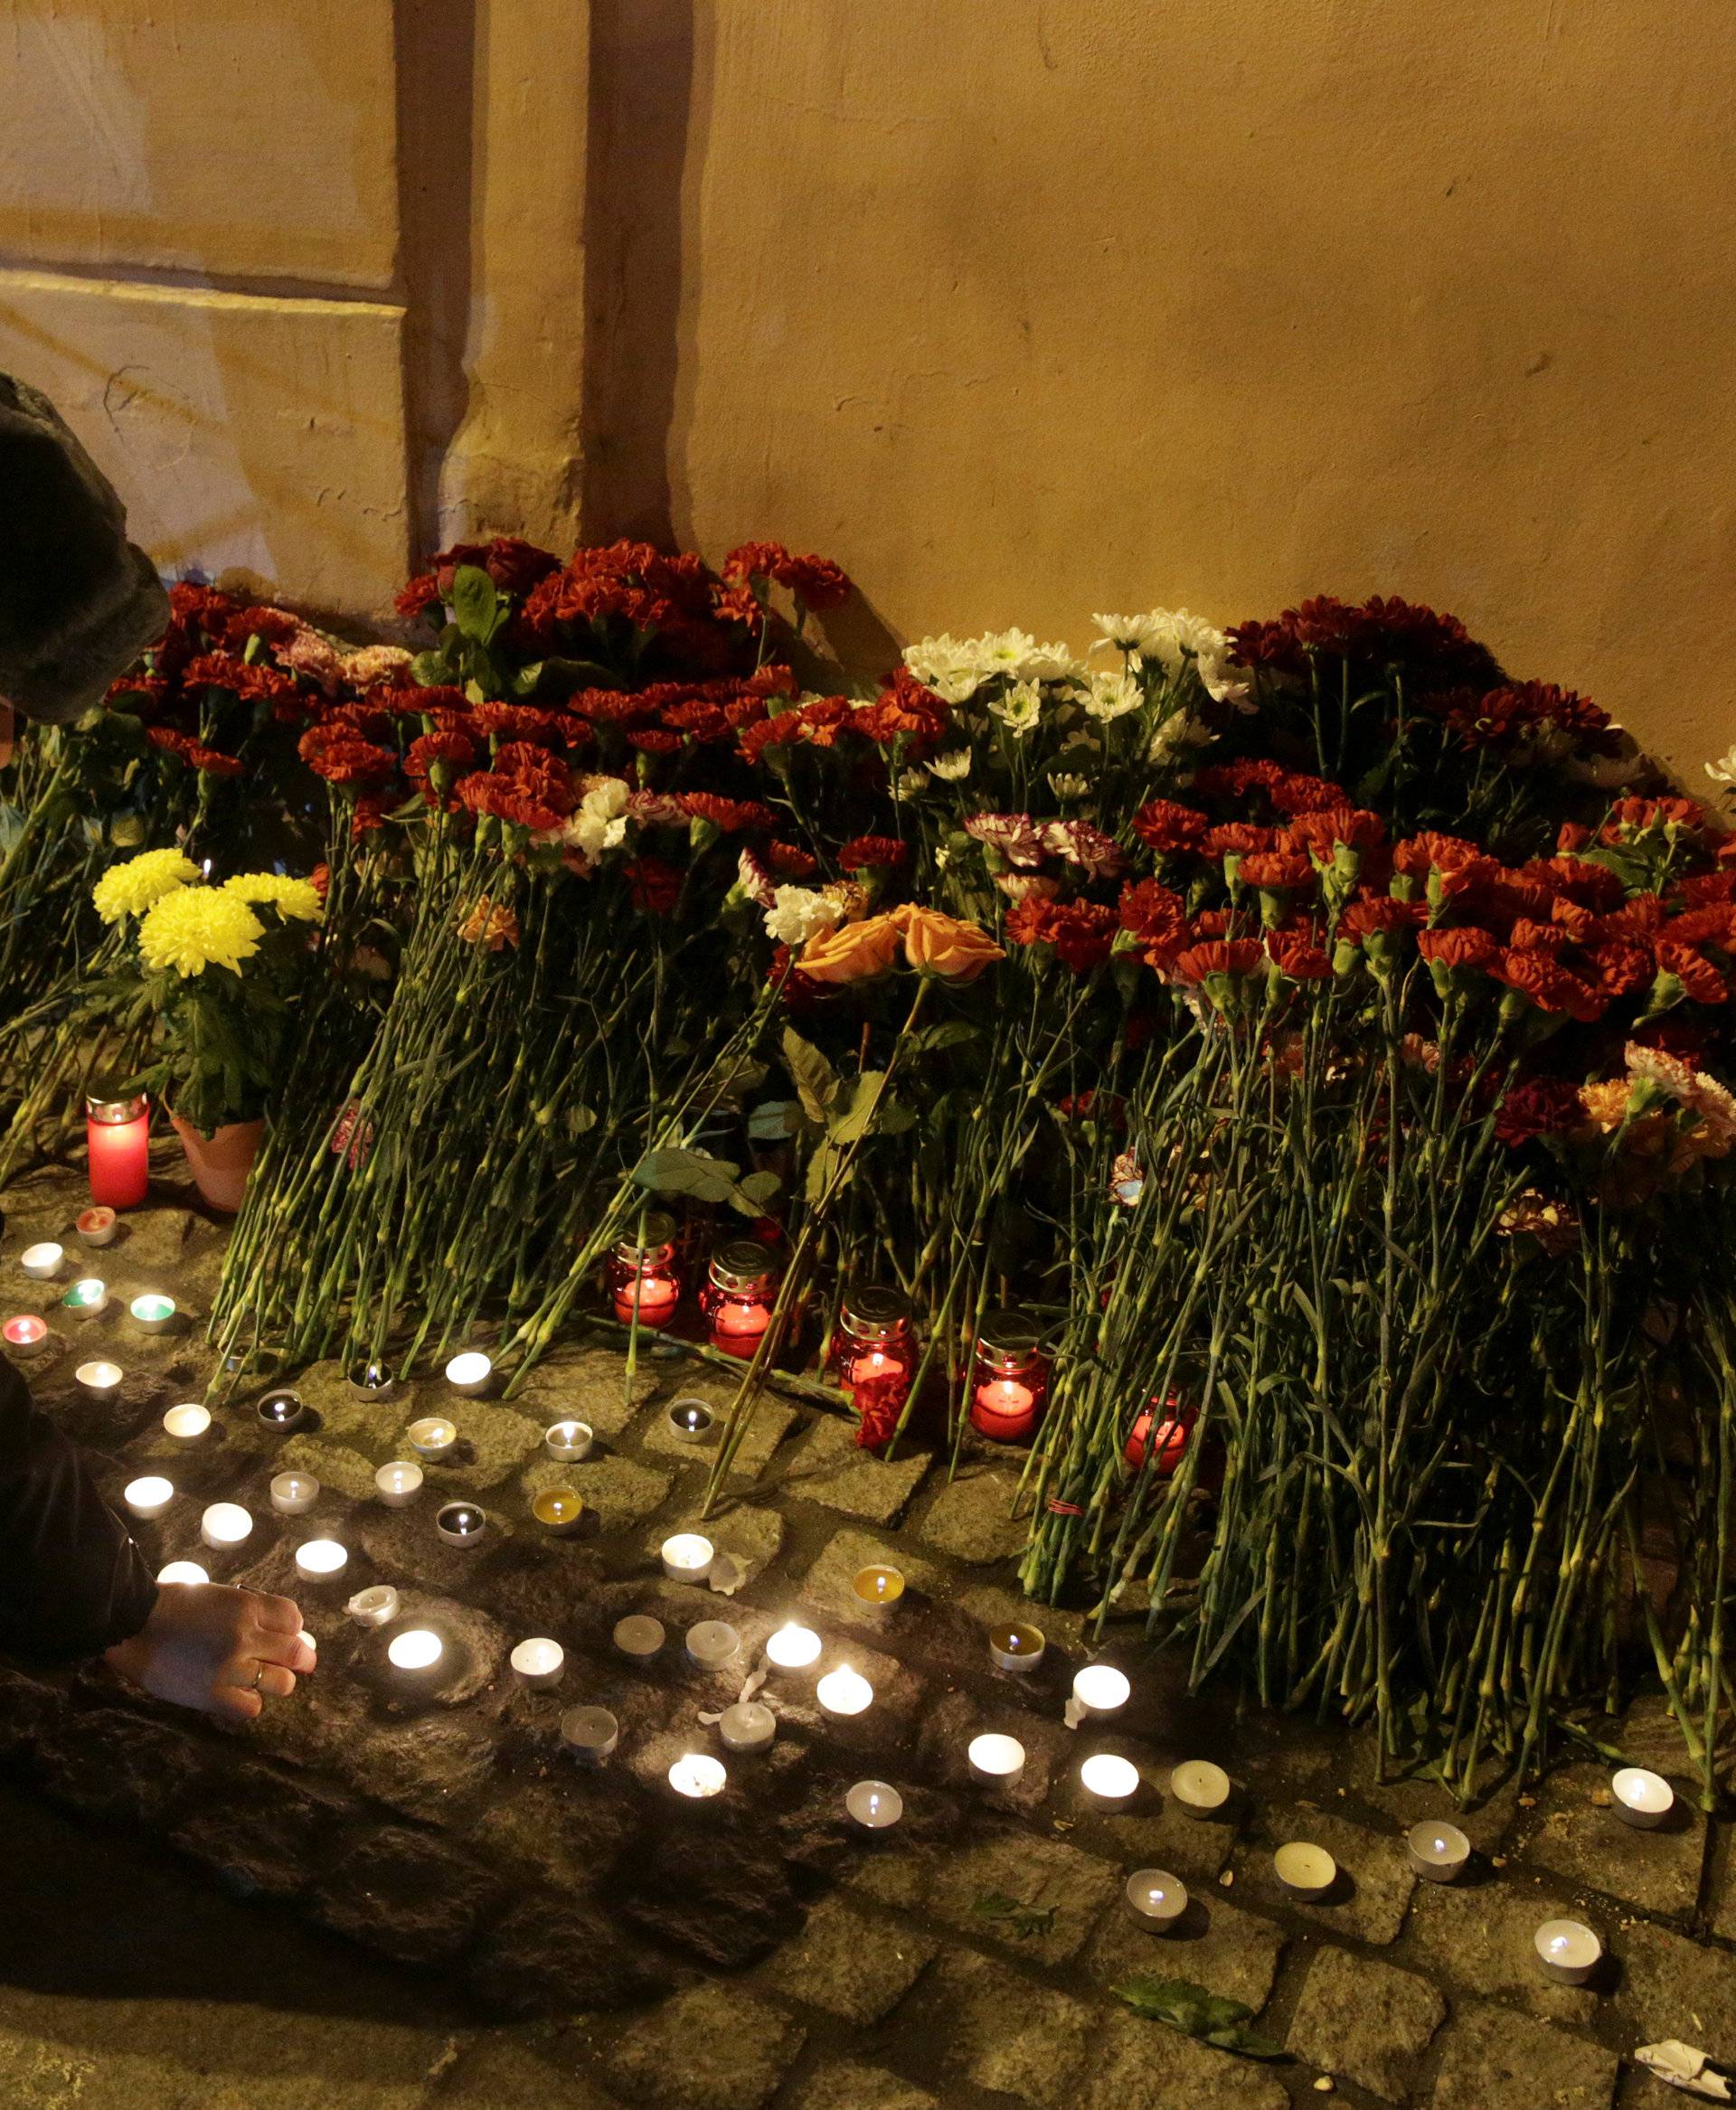 A police officer leaves a candle during a memorial service for victims of a blast in St. Petersburg metro, outside Tekhnologicheskiy institut metro station in St. Petersburg